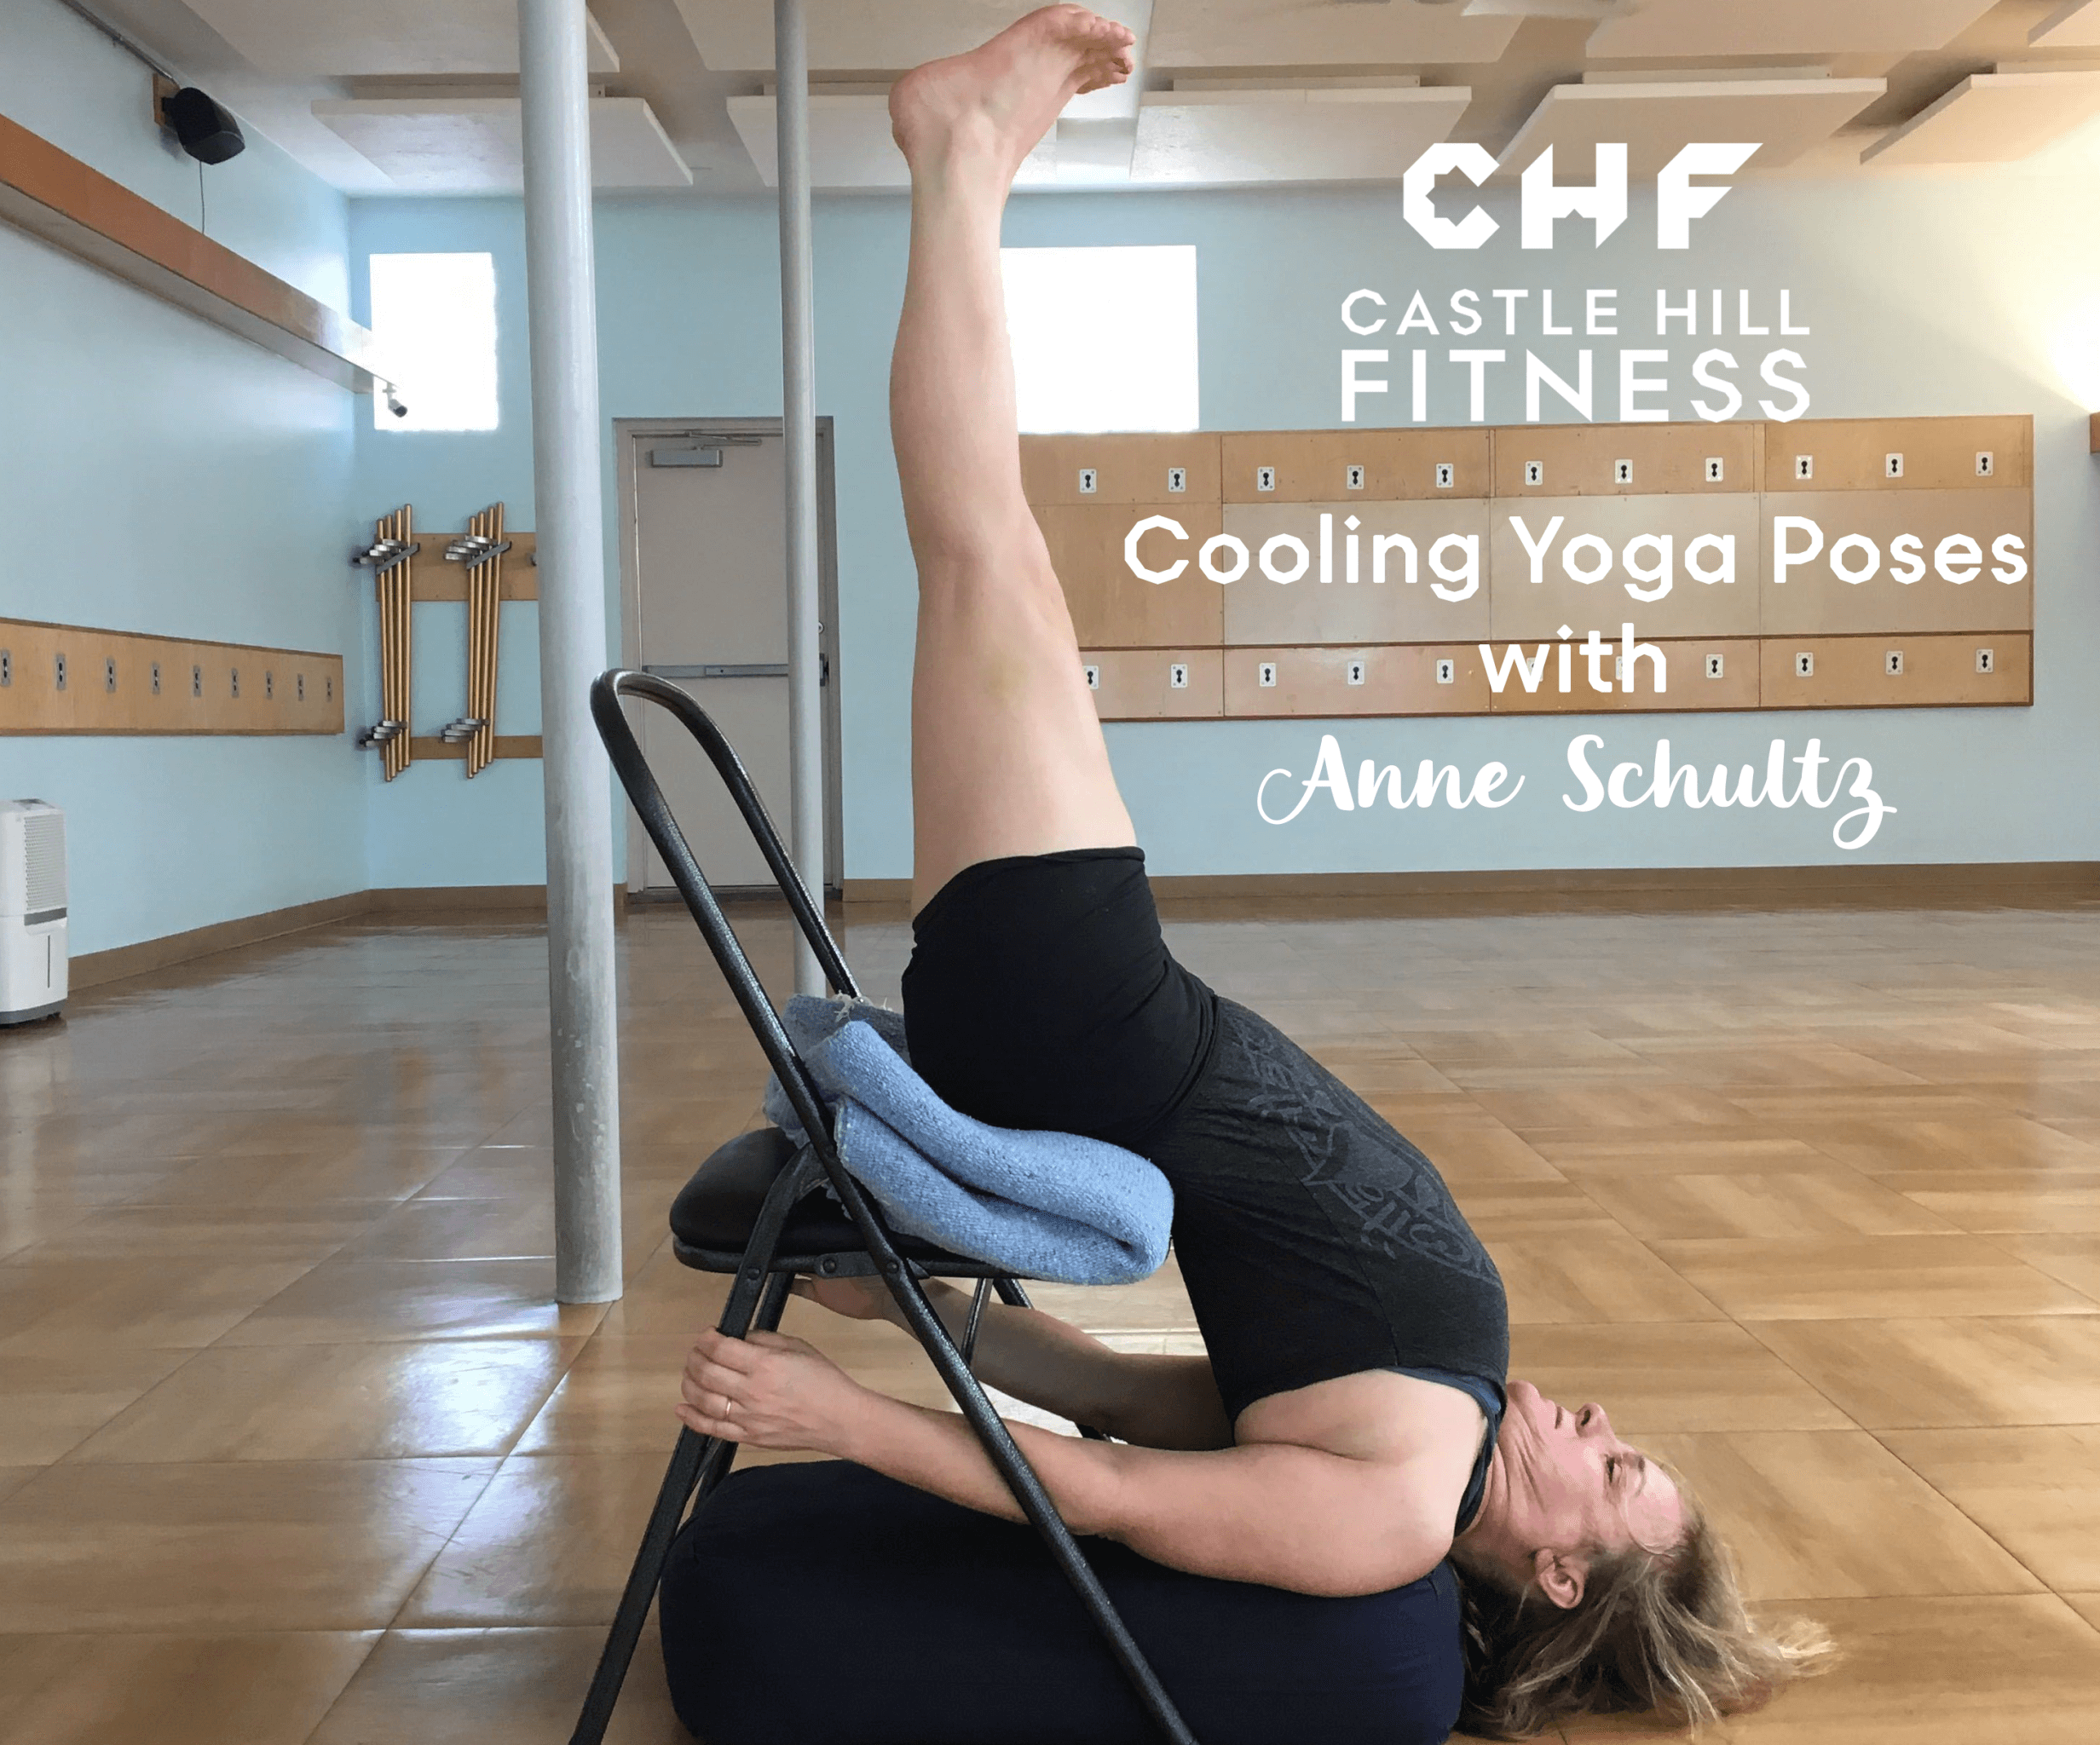 Three Cooling Yoga Poses for Texas Survival